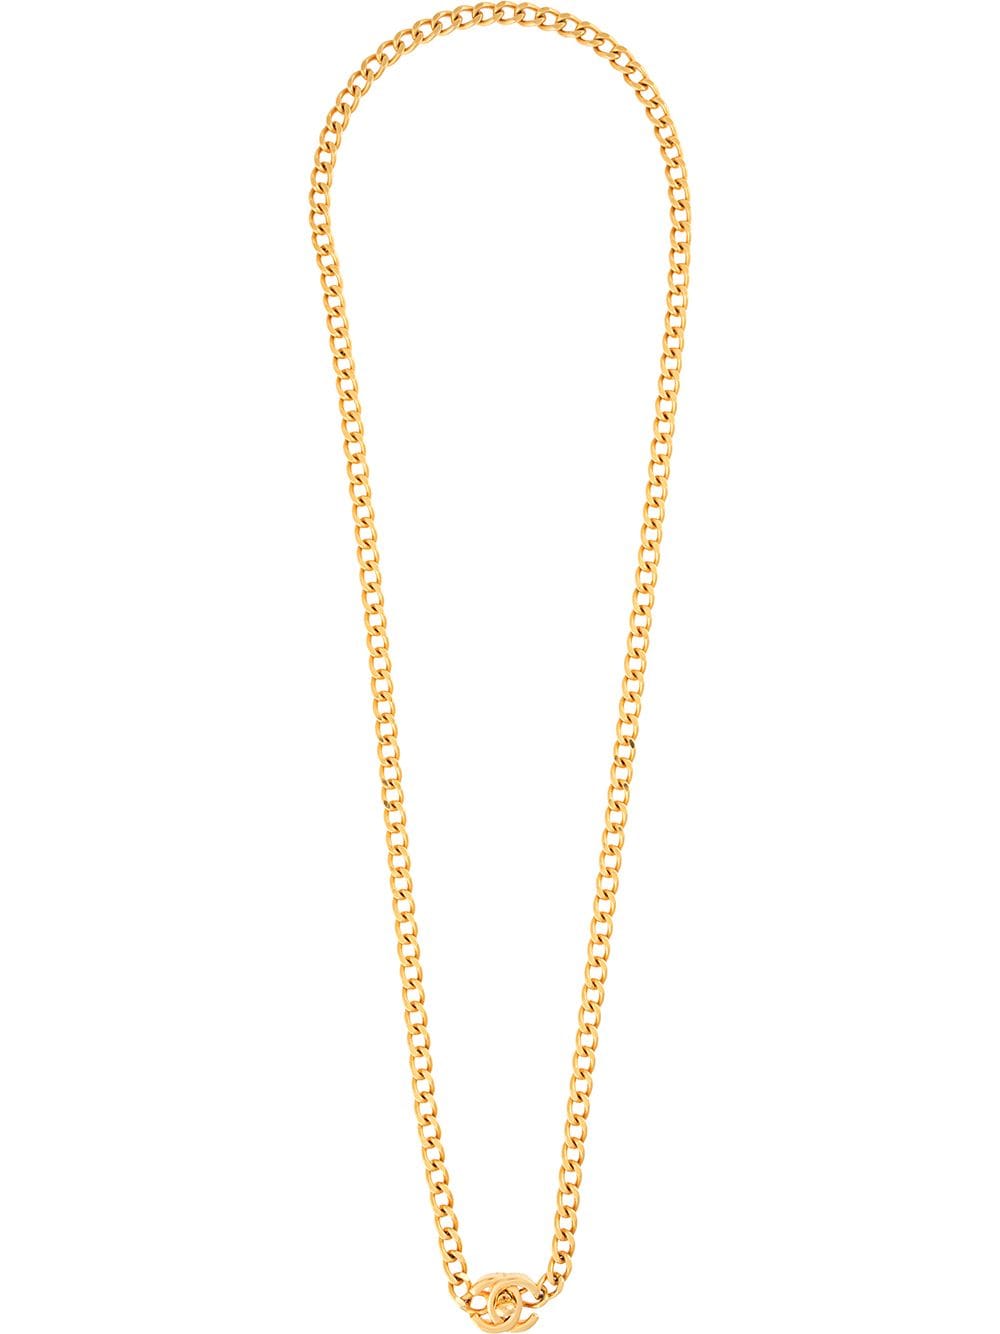 CHANEL Pre-Owned 1994 CC Pendant Necklace - Gold for Women